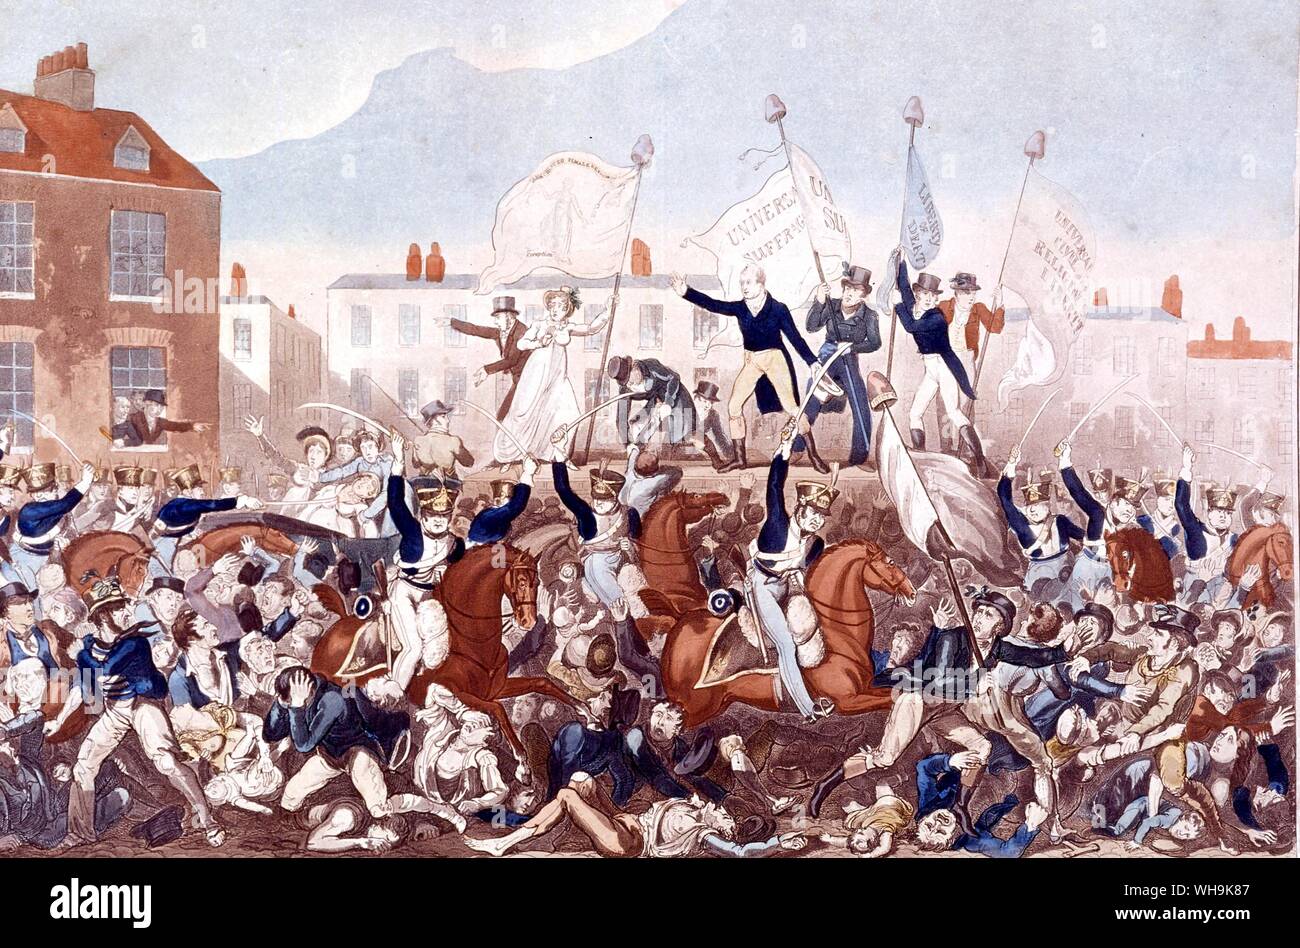 The Peterloo Massacre 1819 Forcible break up of a mass meeting about parliamentary reform held at St Peter's Field Manchester. The Manchester Yeomanry charged into the crowd killing 11 people Stock Photo